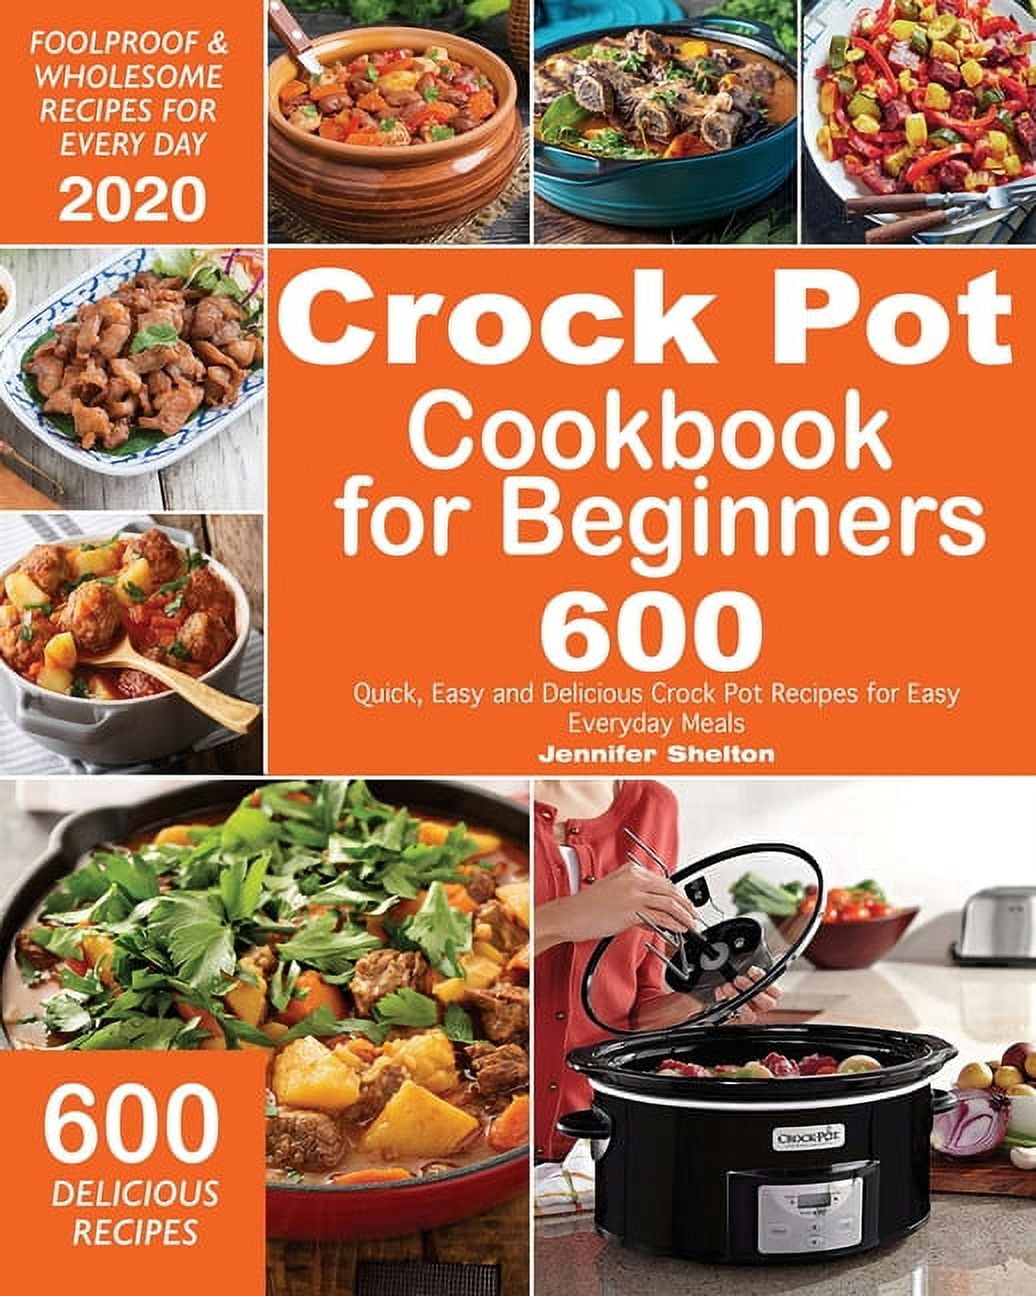 Crock Pot Cookbook for Beginners: 600 Quick, Easy and Delicious Crock Pot Recipes for Everyday Meals Foolproof & Wholesome Recipes for Every Day 2020 [Book]